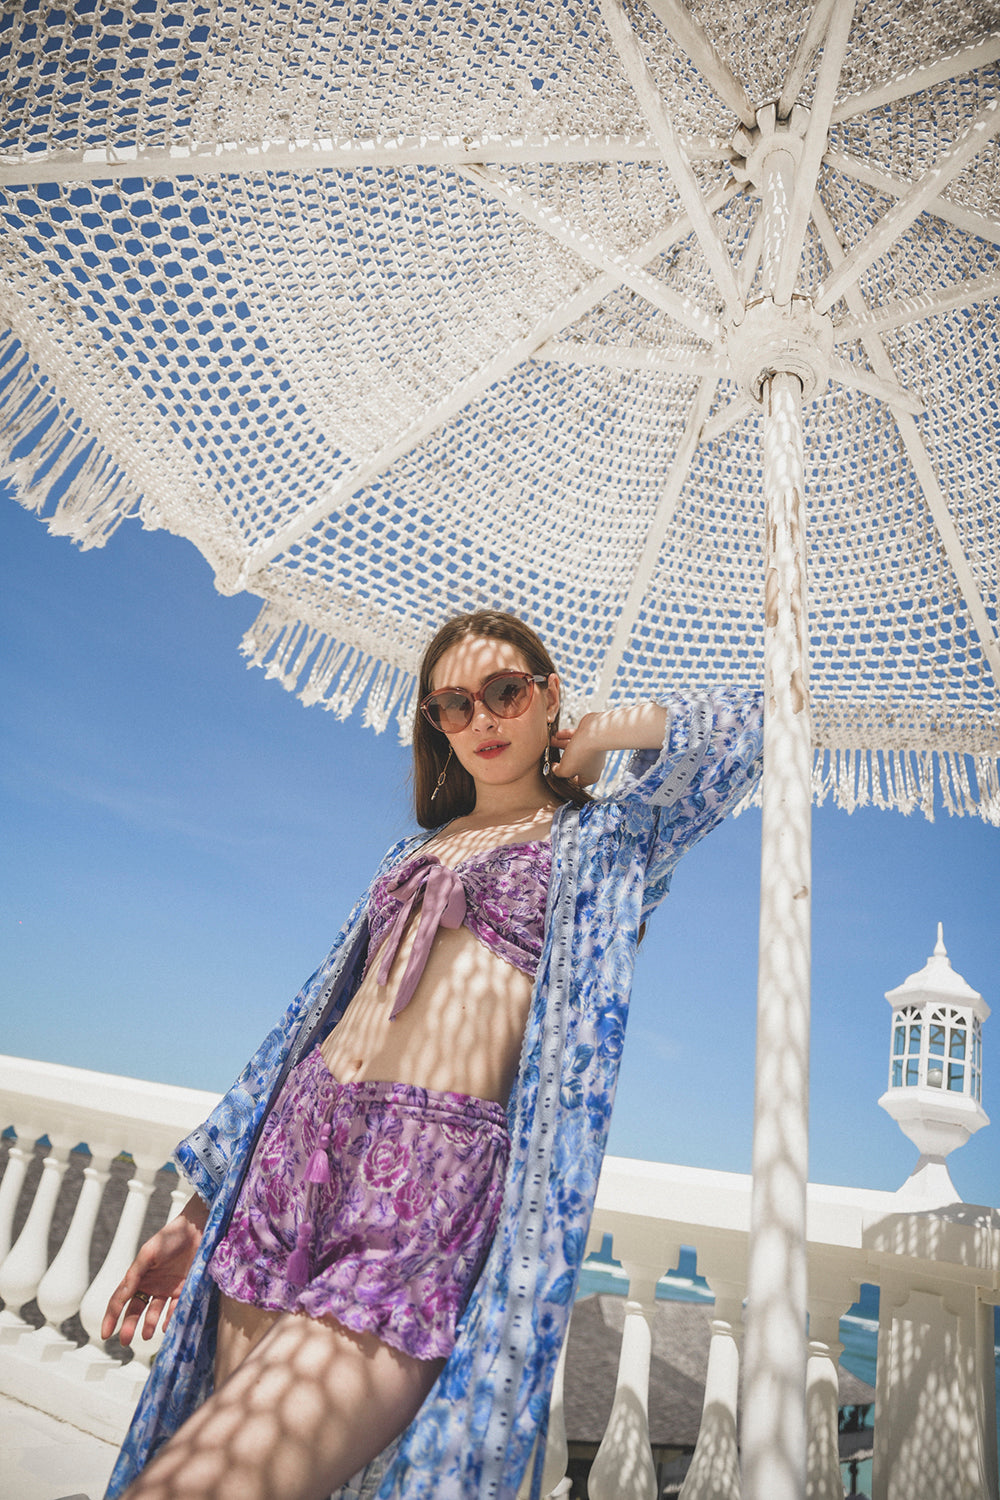 Channel effortless chic with the Peony Long Robe, a modern boho kimono meticulously crafted by Balinese artisans at Tulle and Batiste, ensuring ethical production